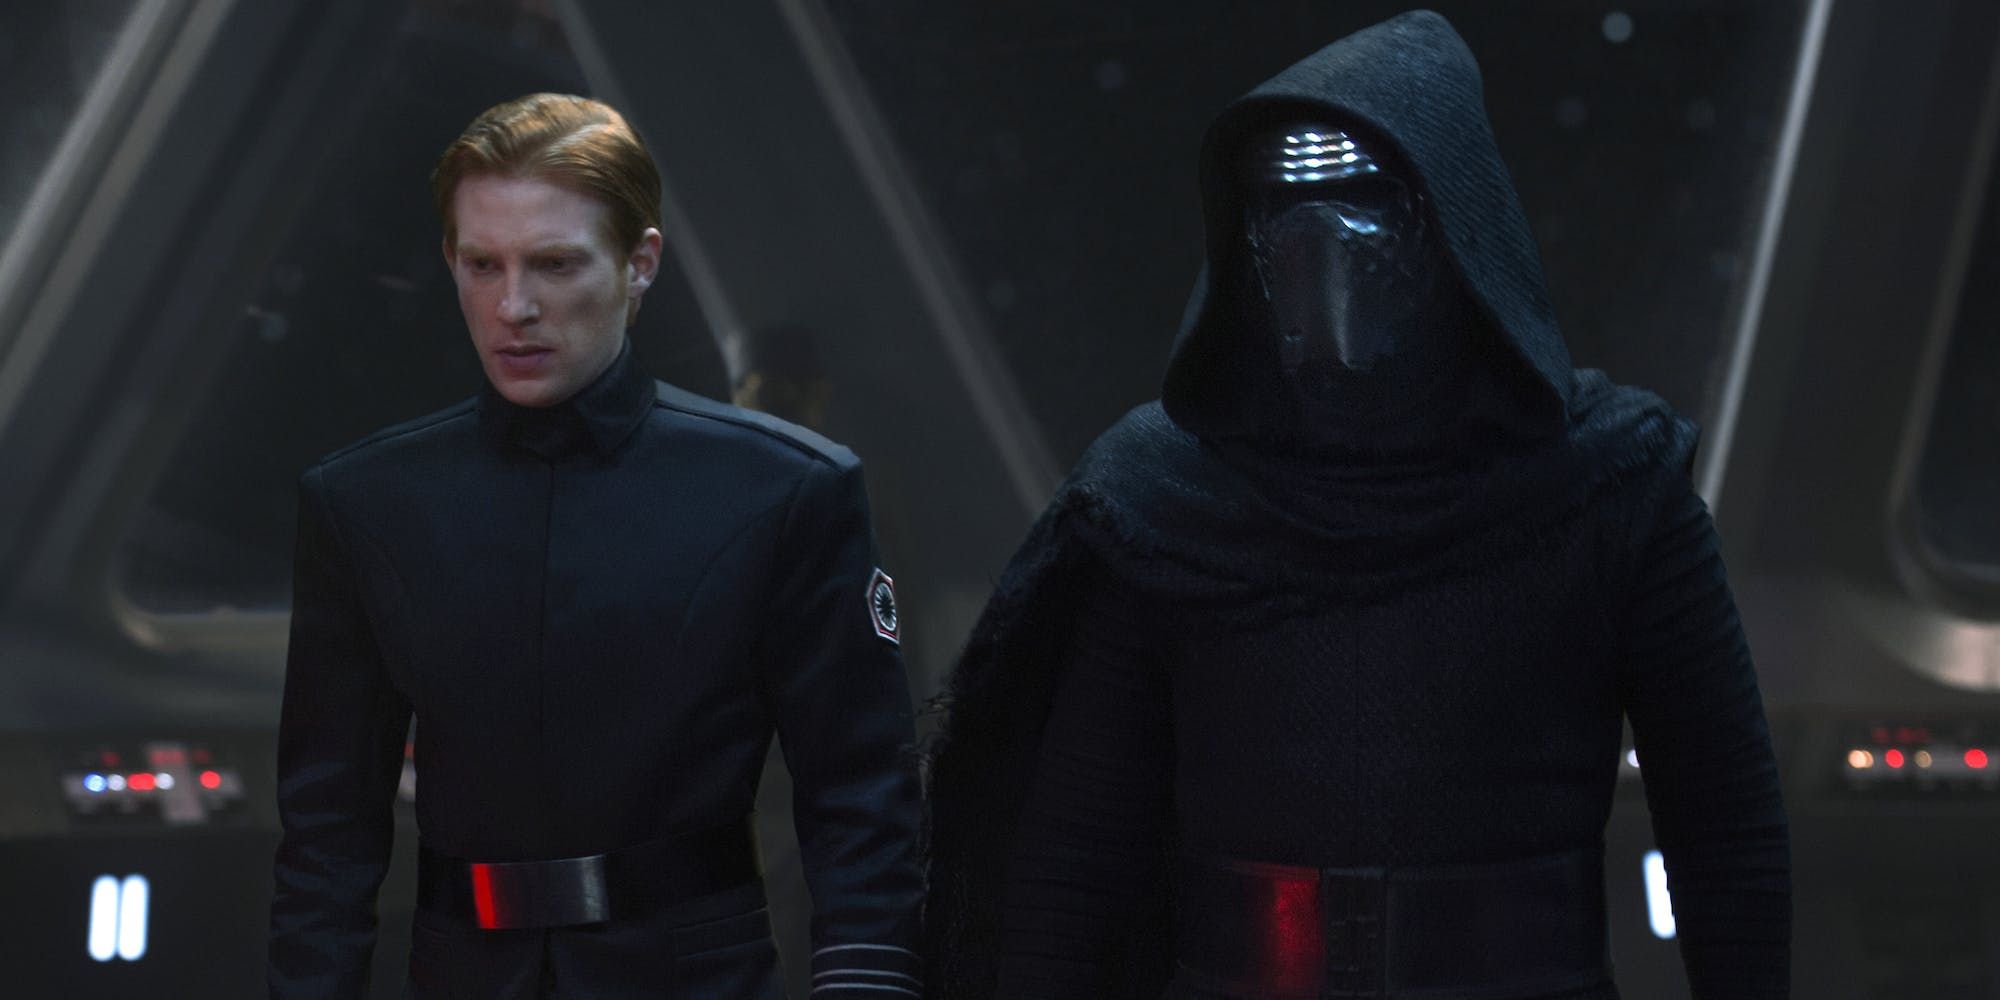 Kylo Ren and General Hux on the bridge in The Force Awakens